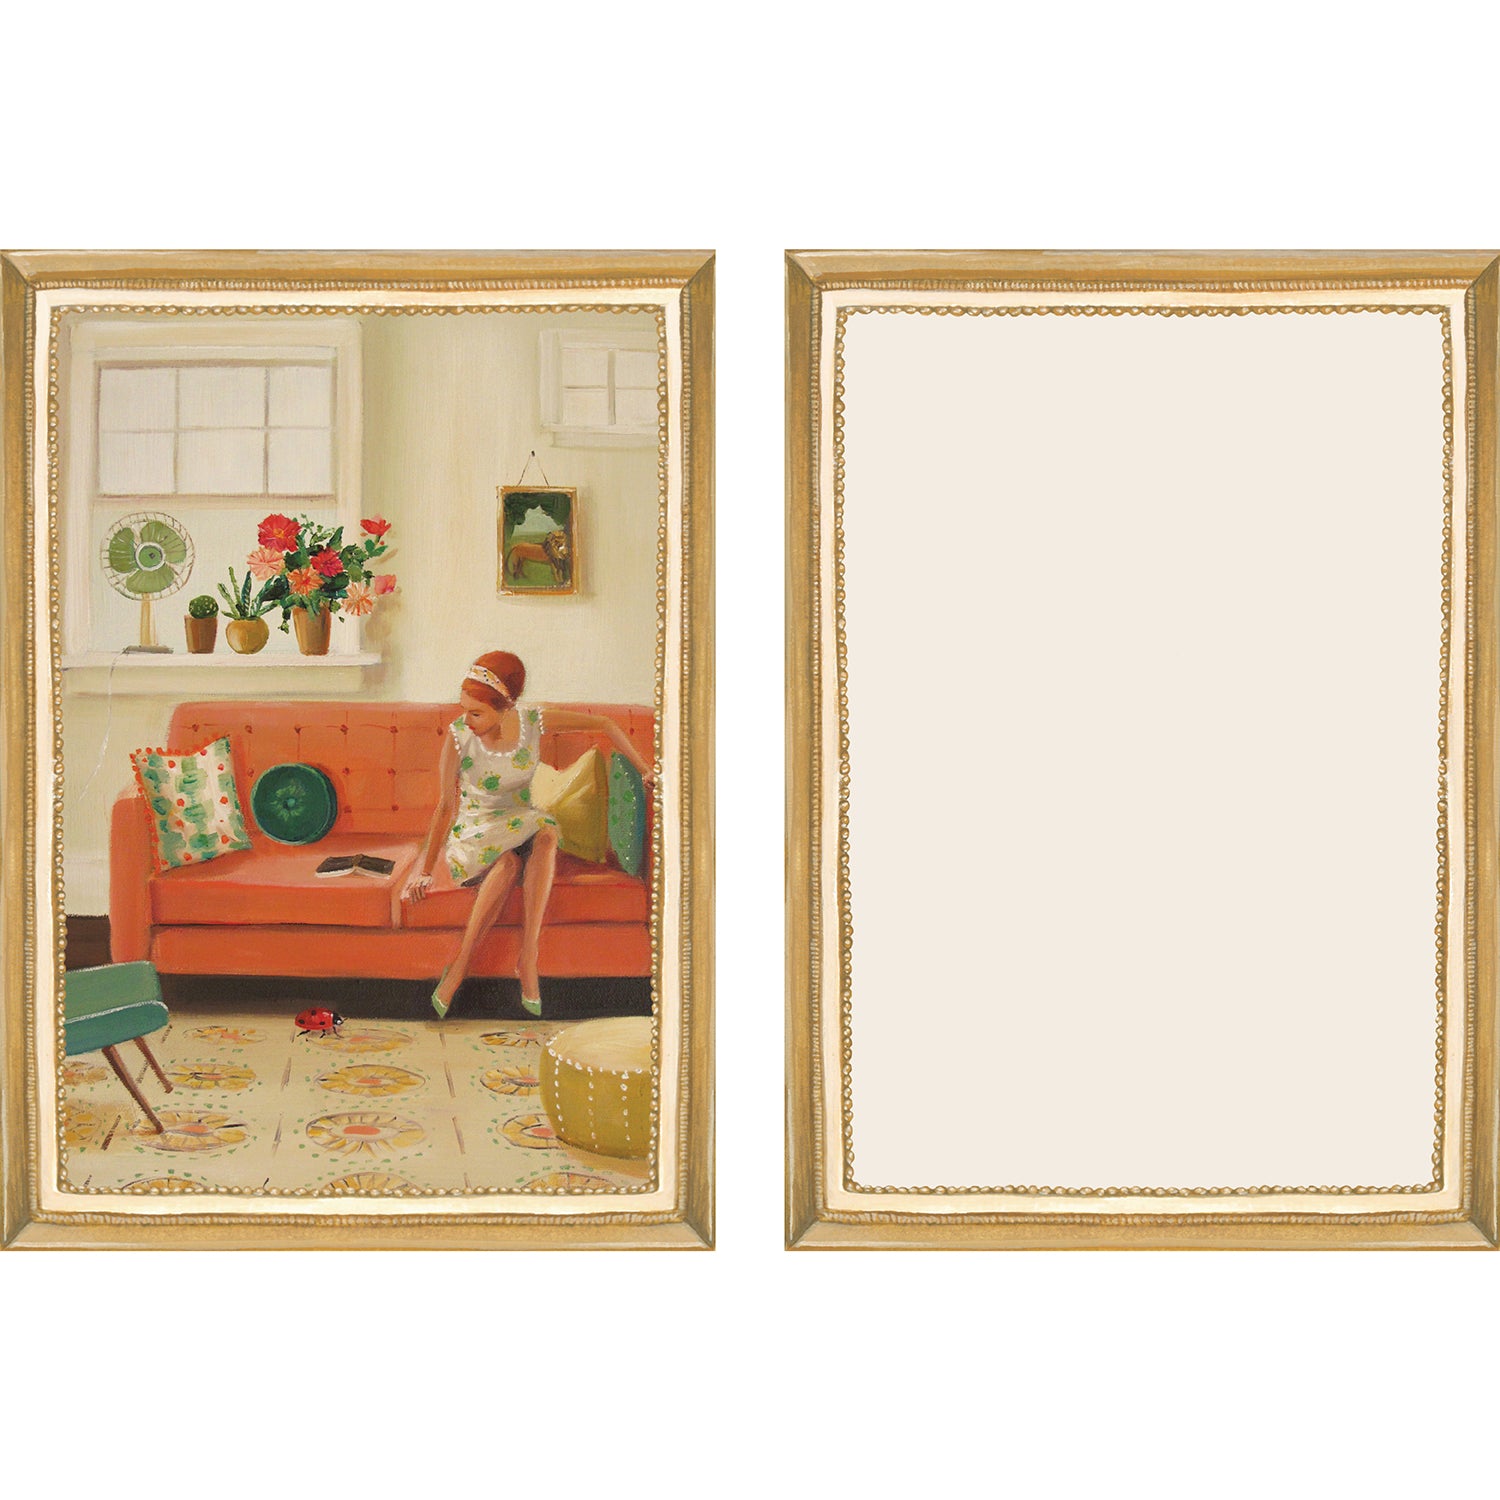 The illustrated front and blank back of a Flat Note, both sides framed in gold, featuring a painterly illustration of a woman sitting on an orange couch in a luxurious living room. 